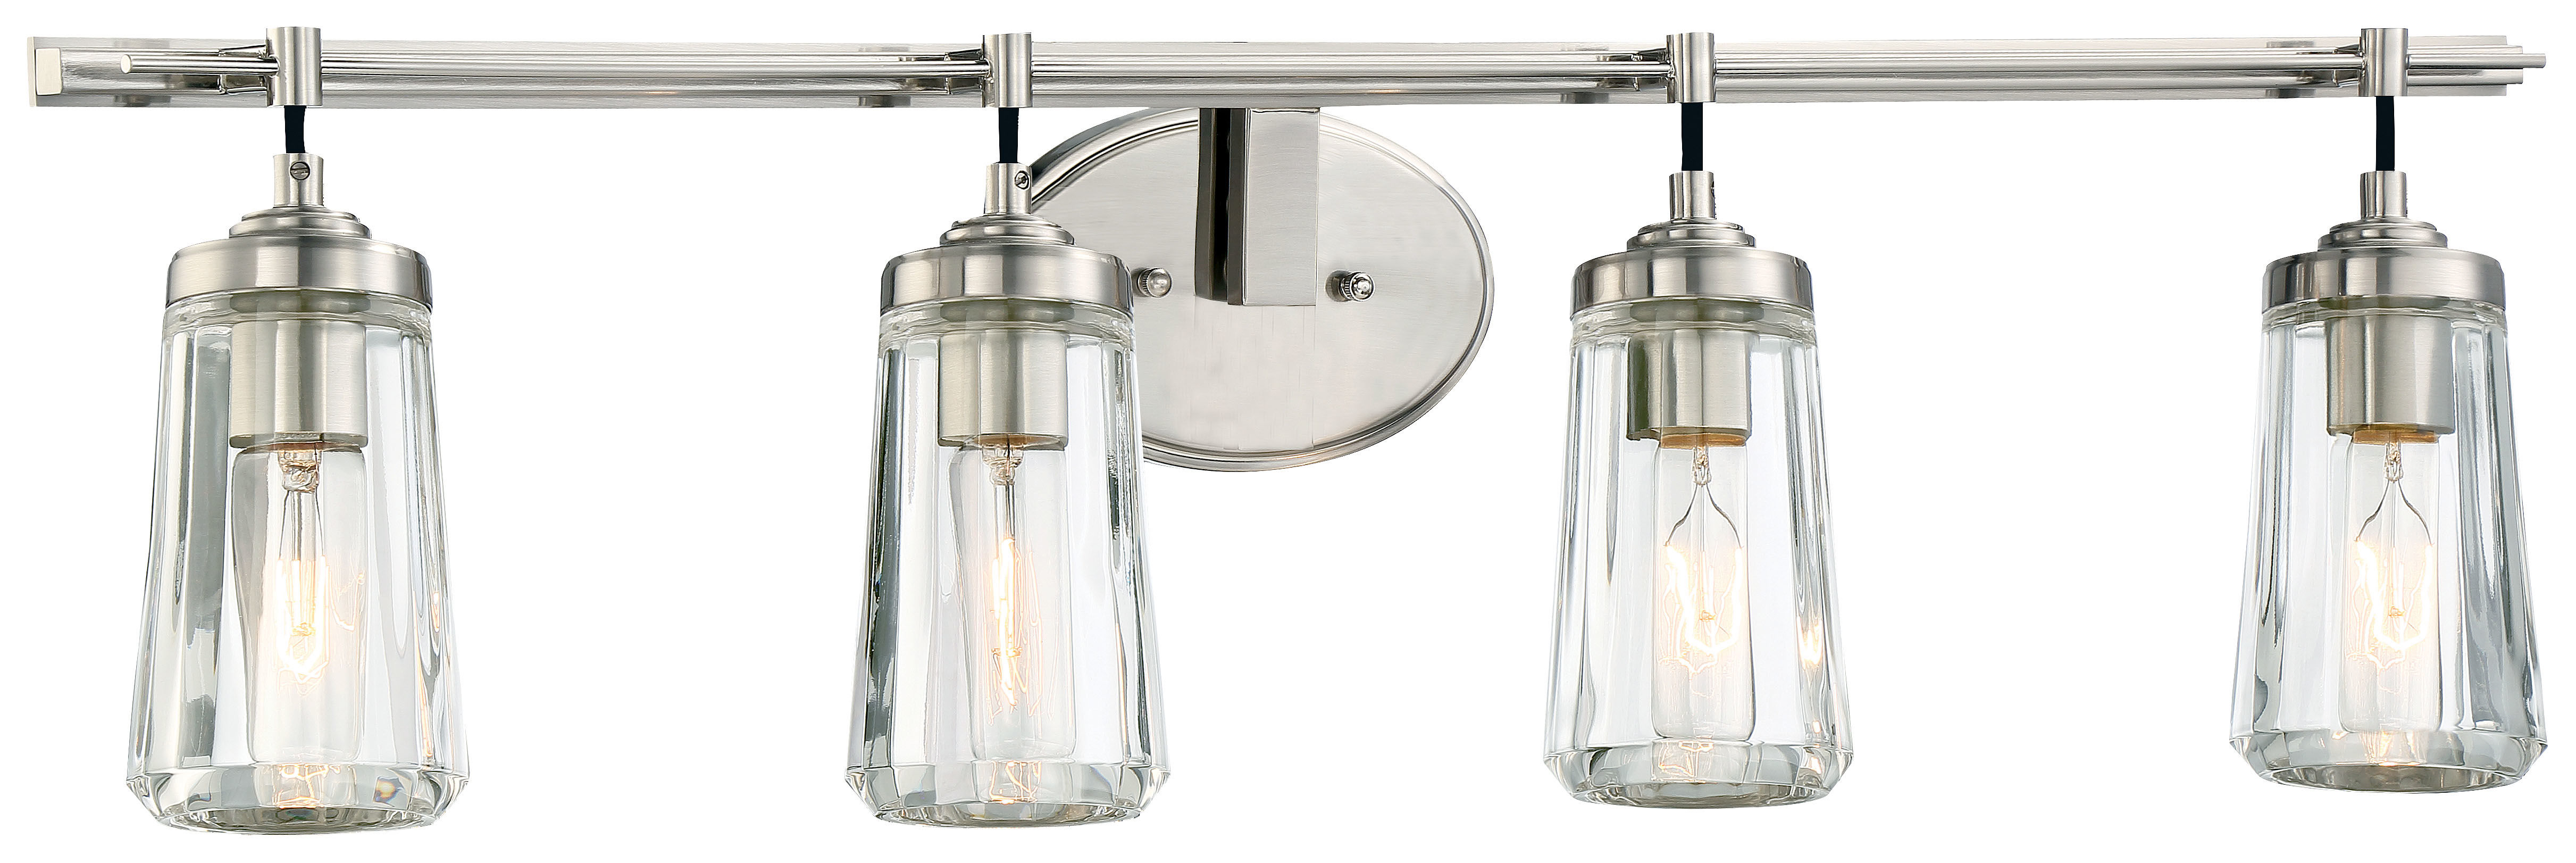 Minka Lavery 2304-84 Brushed Nickel 4 Light Vanity Light from the Poleis  Collection - LightingDirect.com